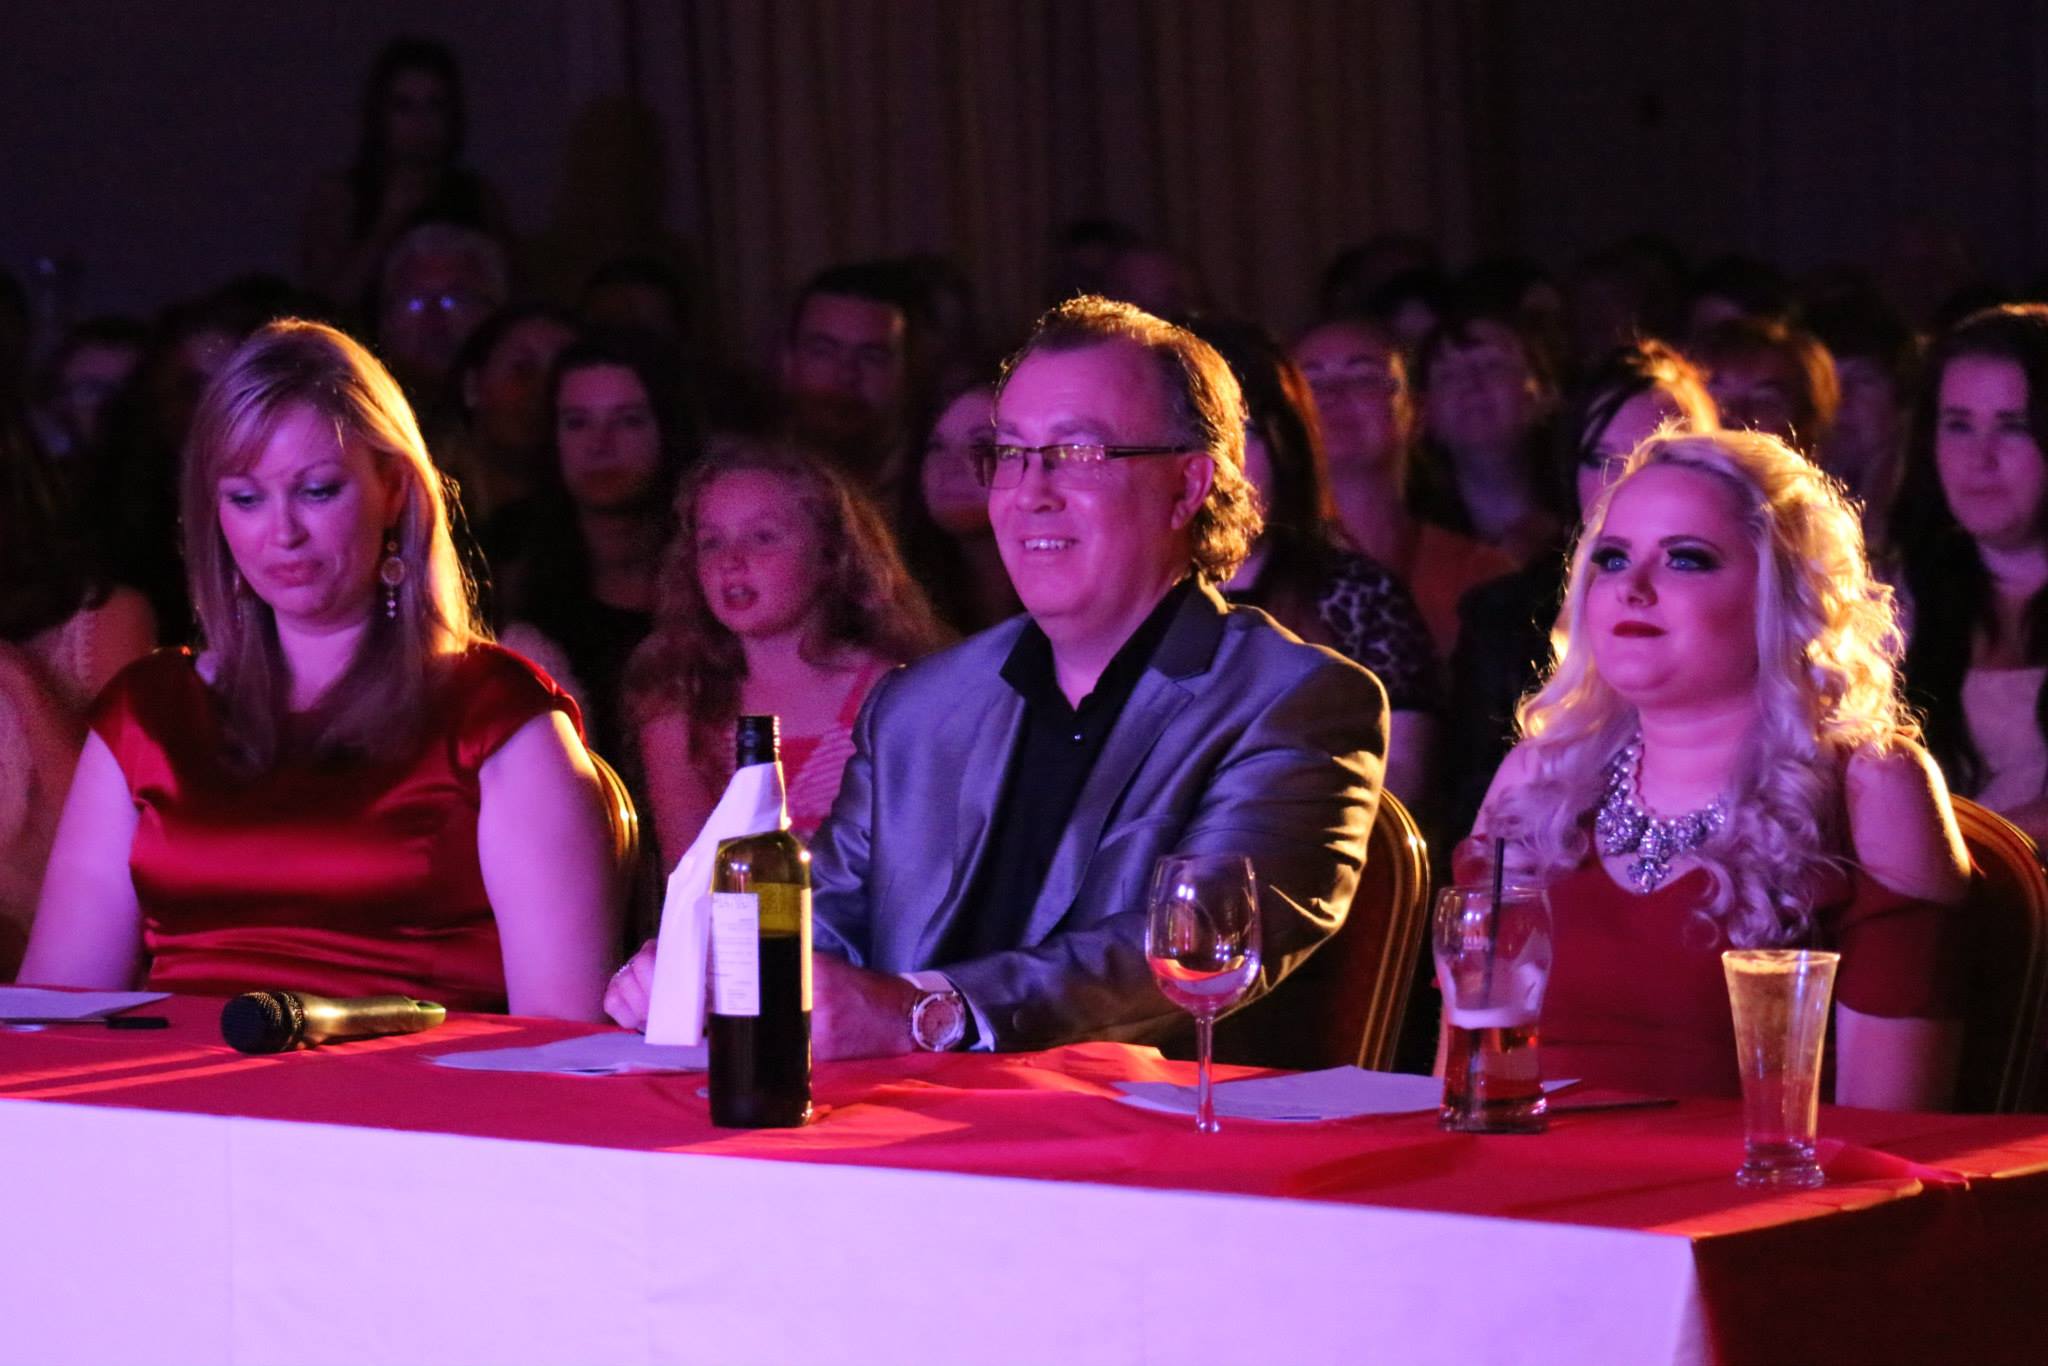 In the middle - the X-Factor Judges Panel 2015